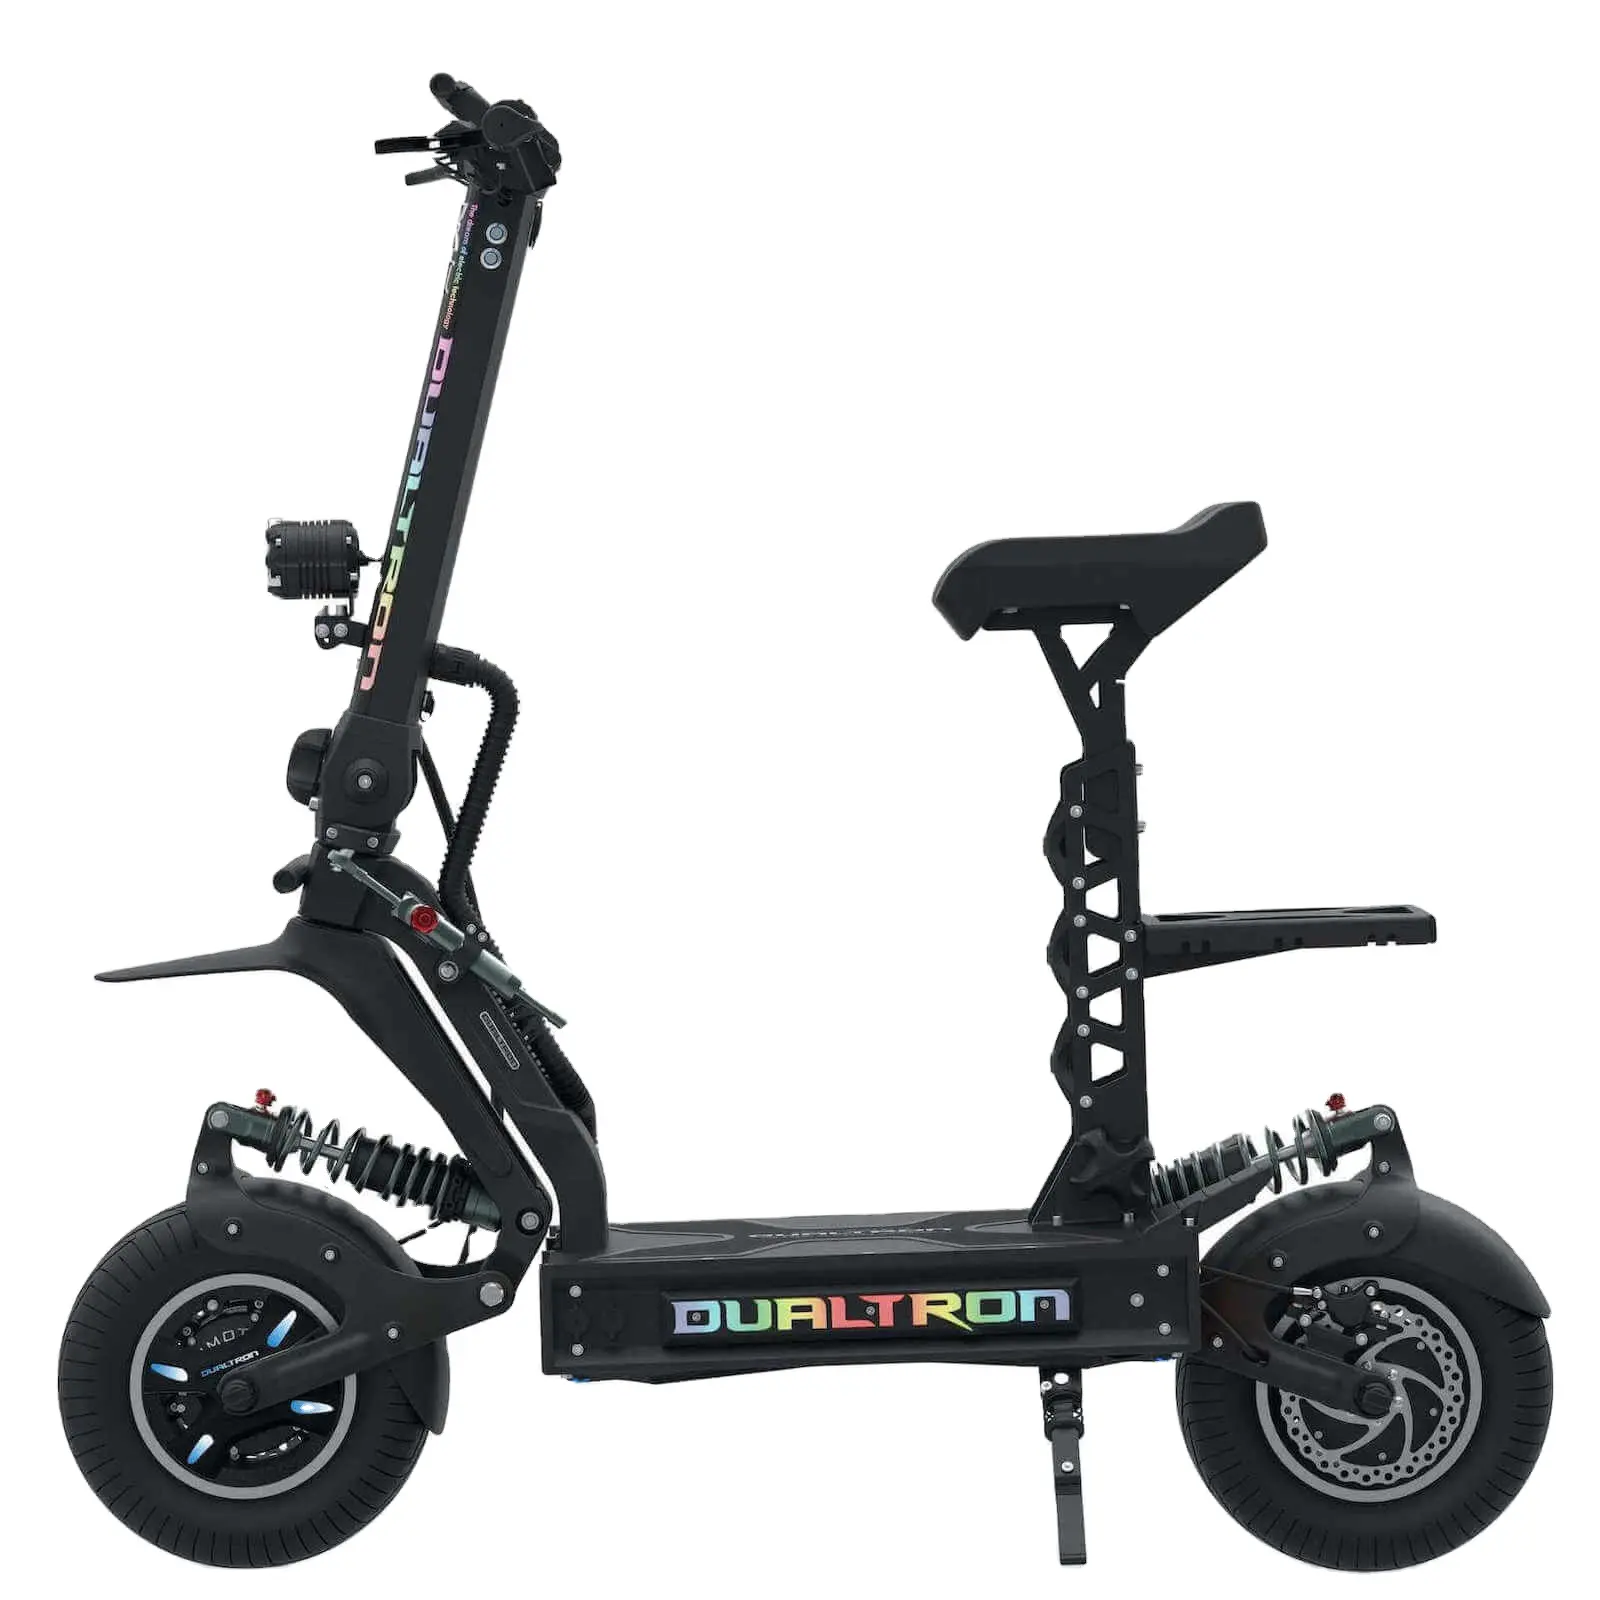 Authentic New Dual_tron X II UP 8300watt 72V 42AH 100km/h scooter foldable Adult size off-road electric scooter